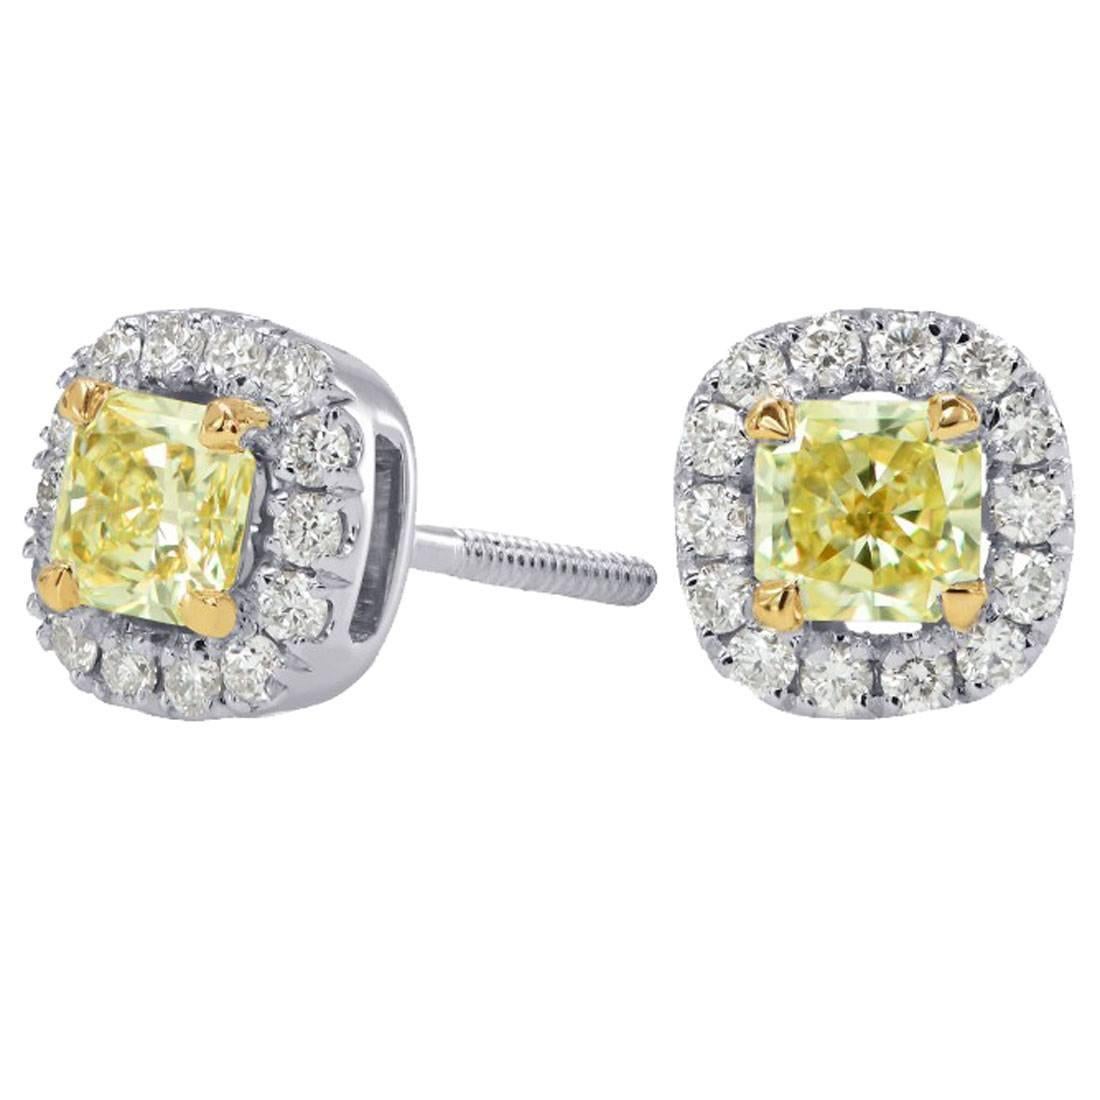 Natural Fancy Yellow Radiant Cut Diamond Gold Ring Earrings and Pendant Set For Sale